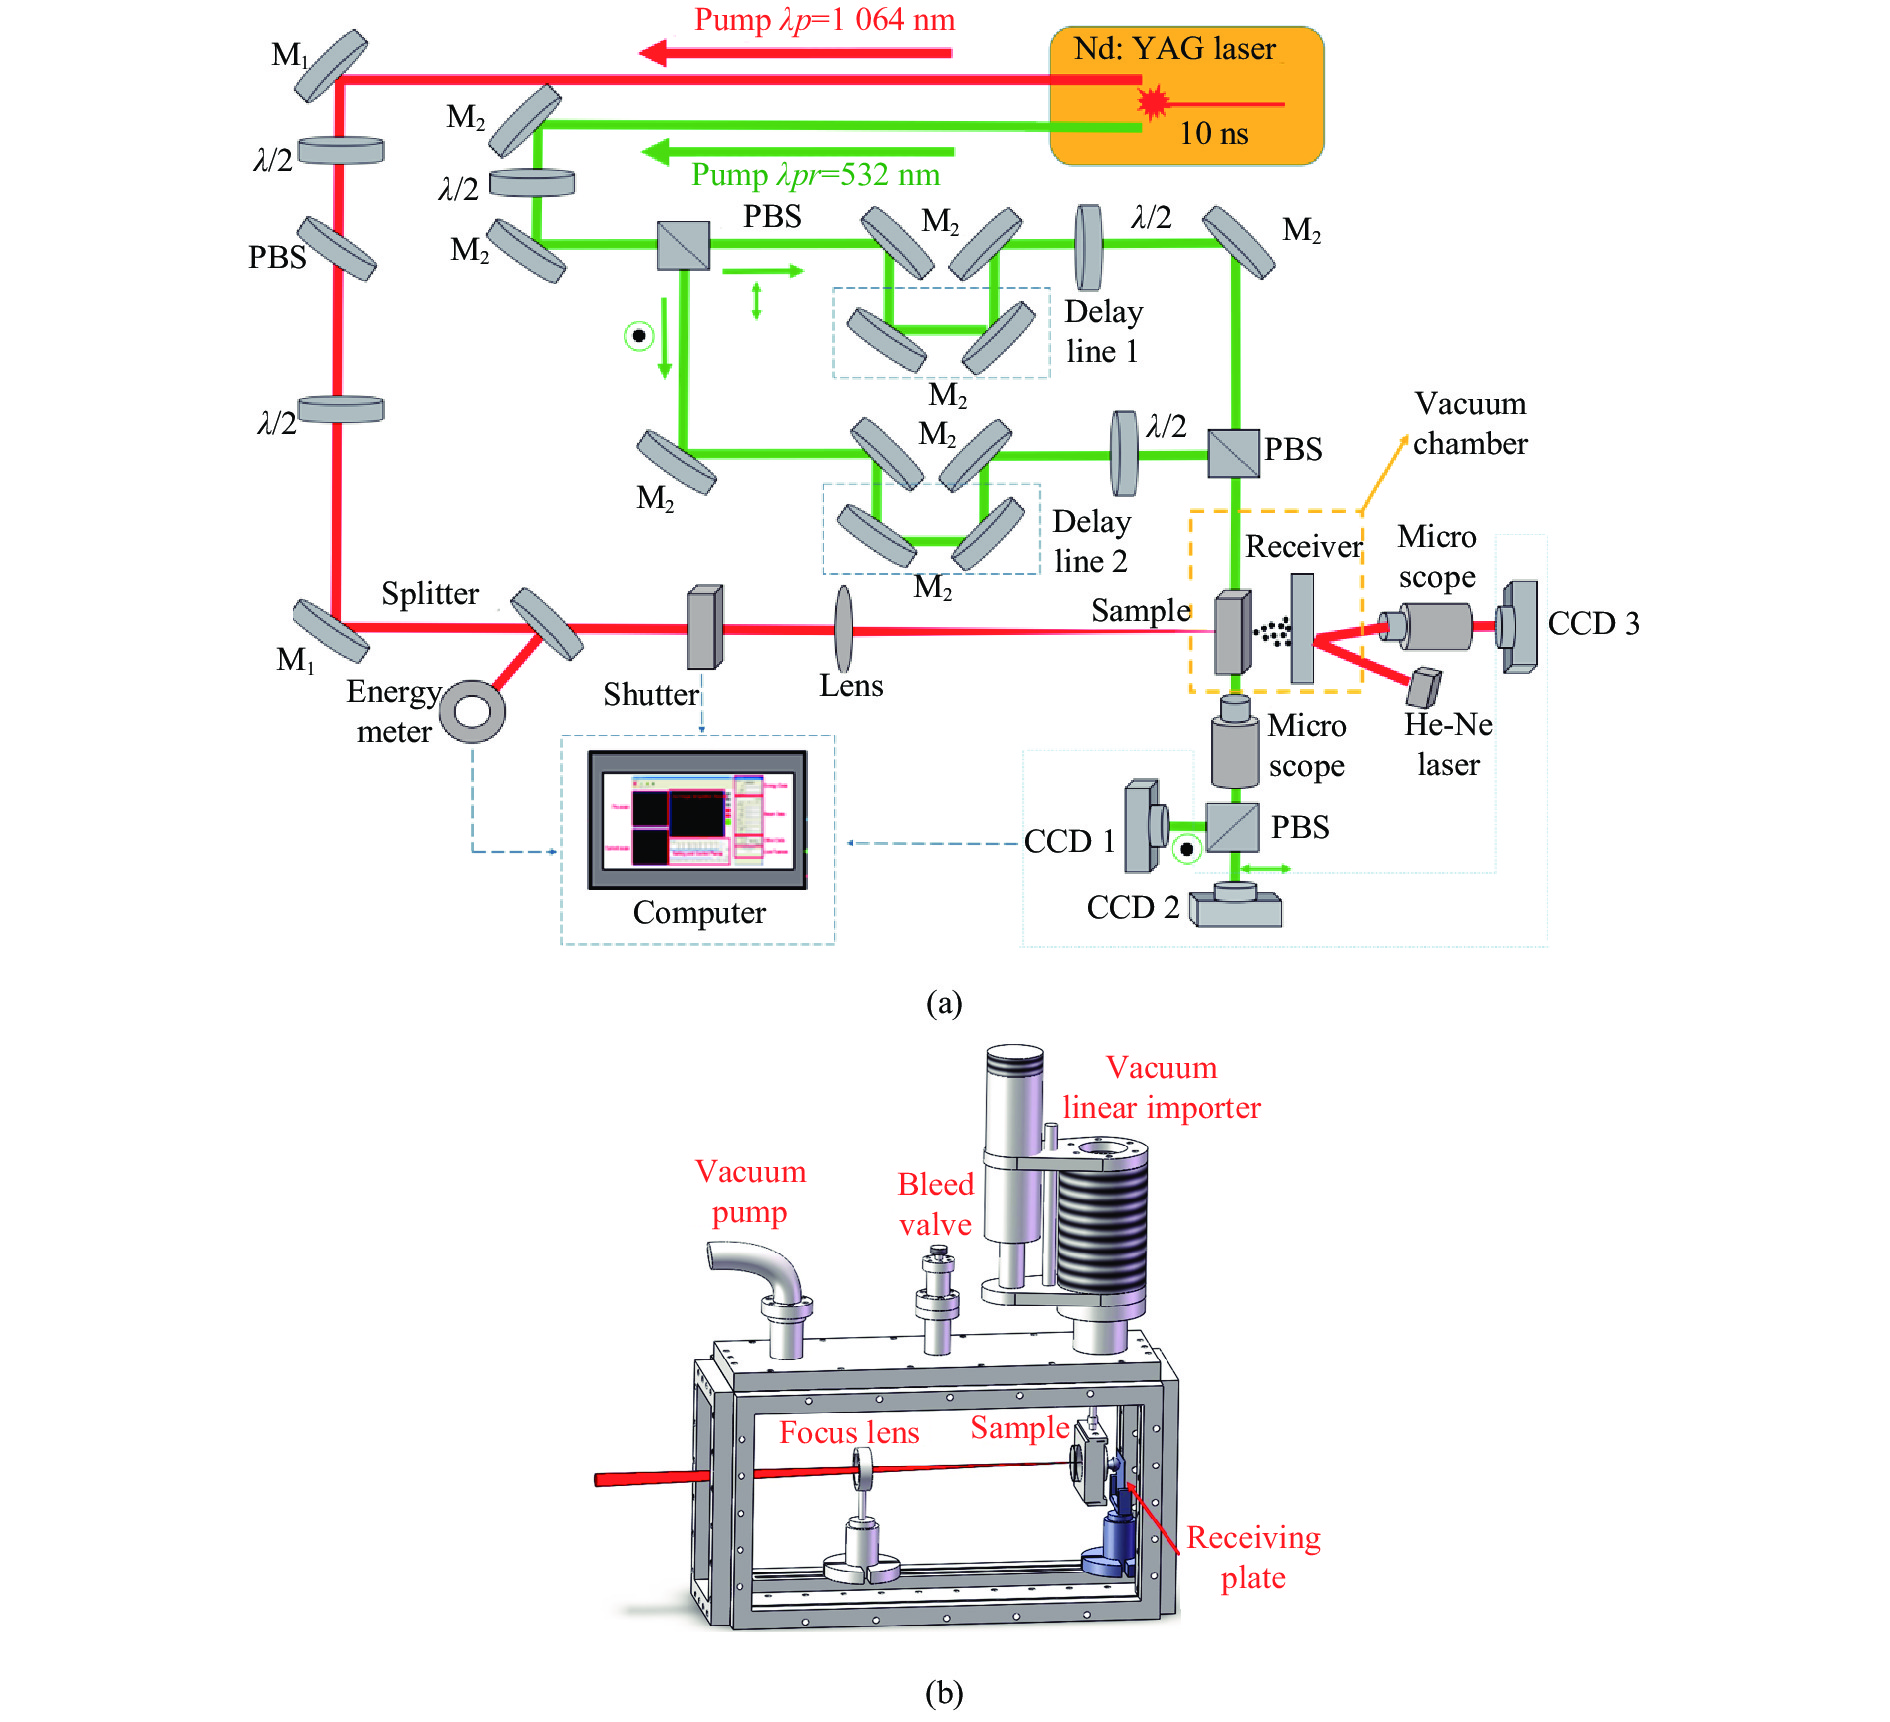 Schematic of experimental equipment. (a) LIDT test system with pump-probe technology; (b) A small vacuum system